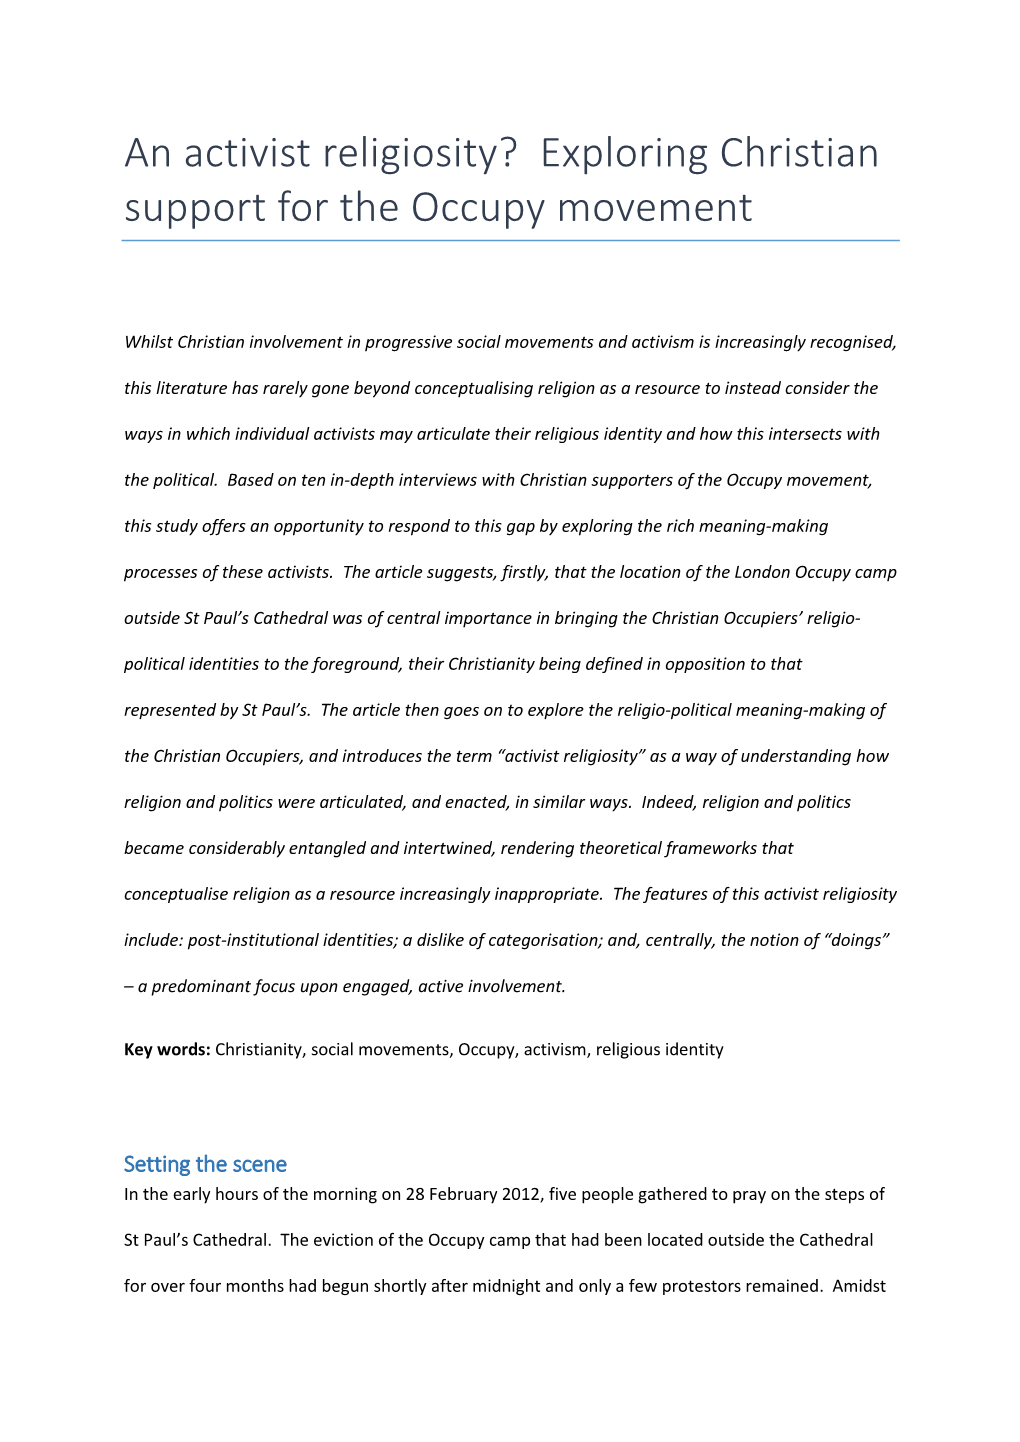 An Activist Religiosity? Exploring Christian Support for the Occupy Movement